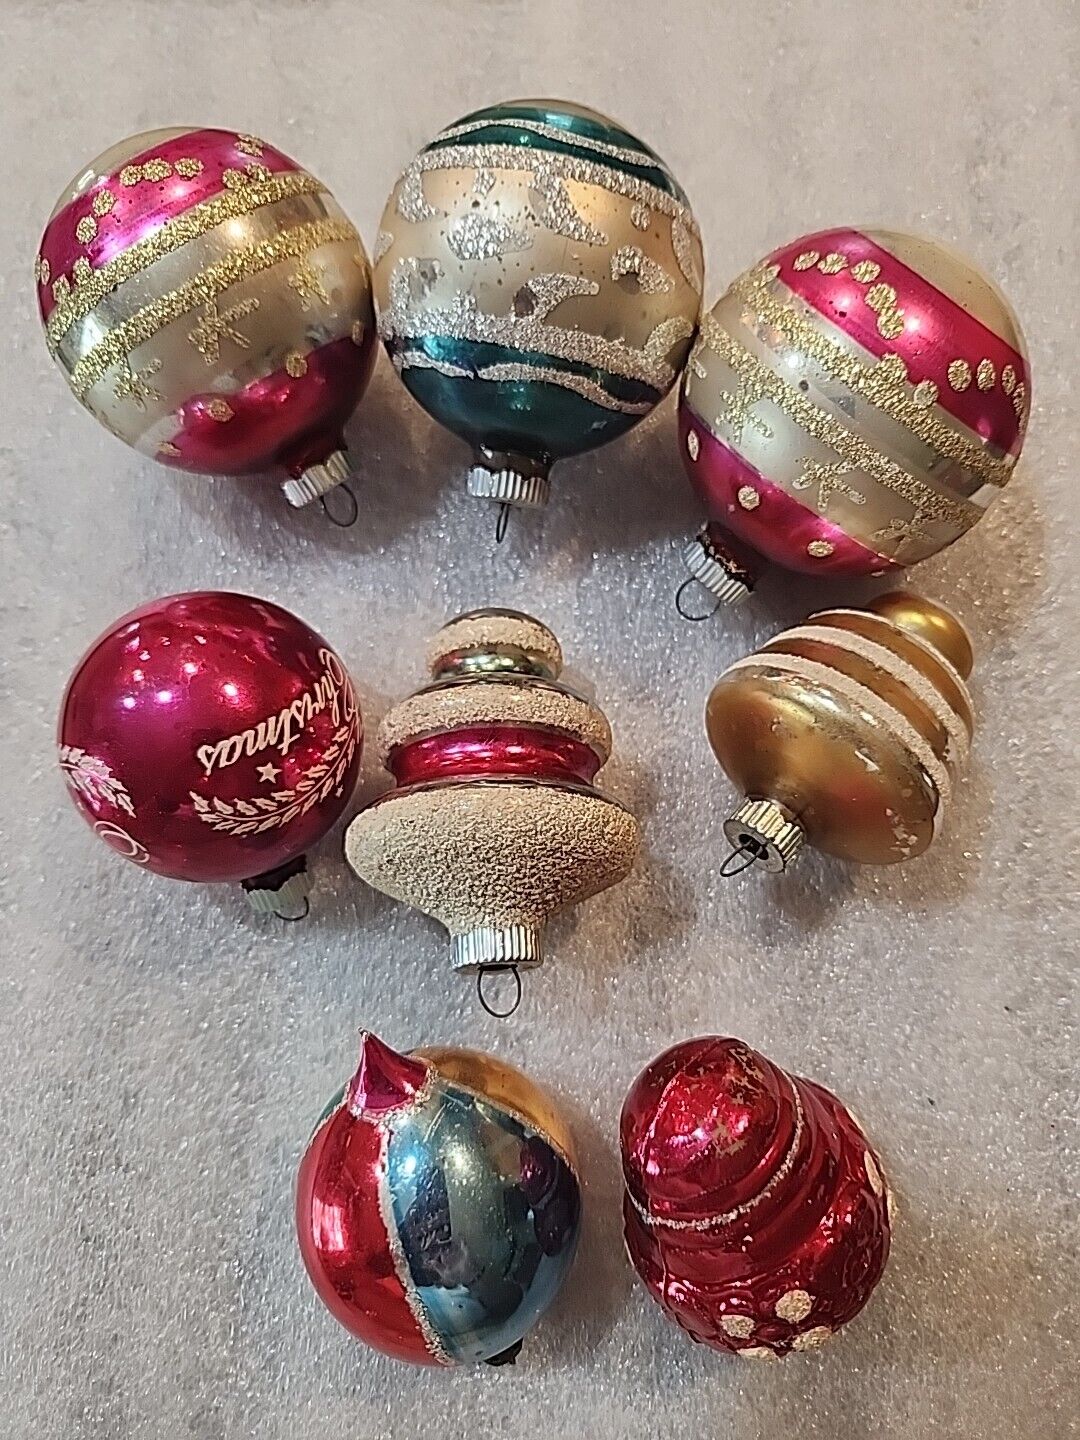 8 SHINY BRITE AND POLAND CHRISTMAS ORNAMENTS  VINTAGE COLLECTABLE MERCURY GLASS